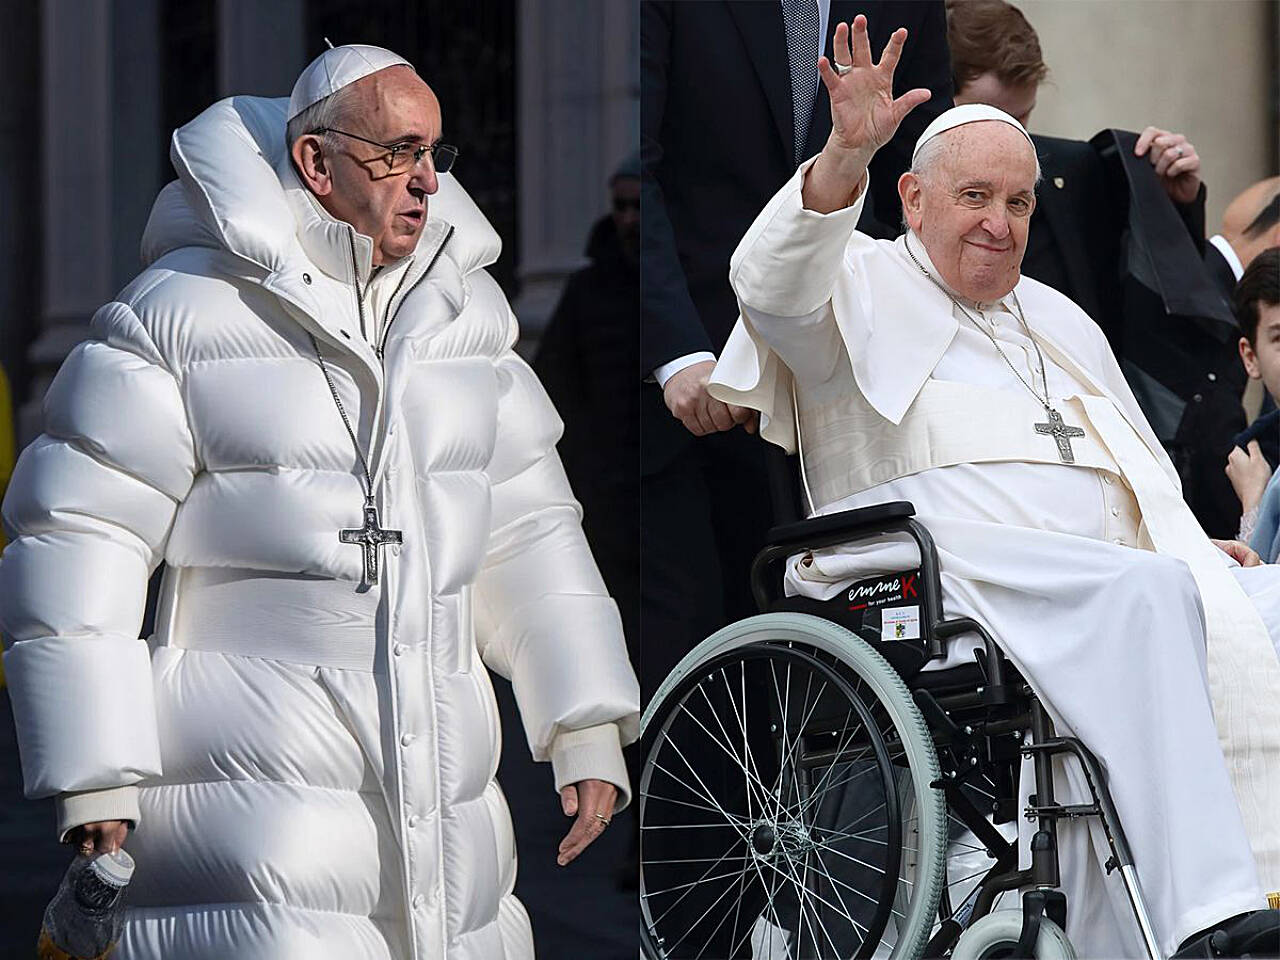 Two images of Pope Francis show a faked photo (left) of the pontiff in a puffy coat and (right) in a news photo taken of the pope last May at the Vatican. (Bloomberg)